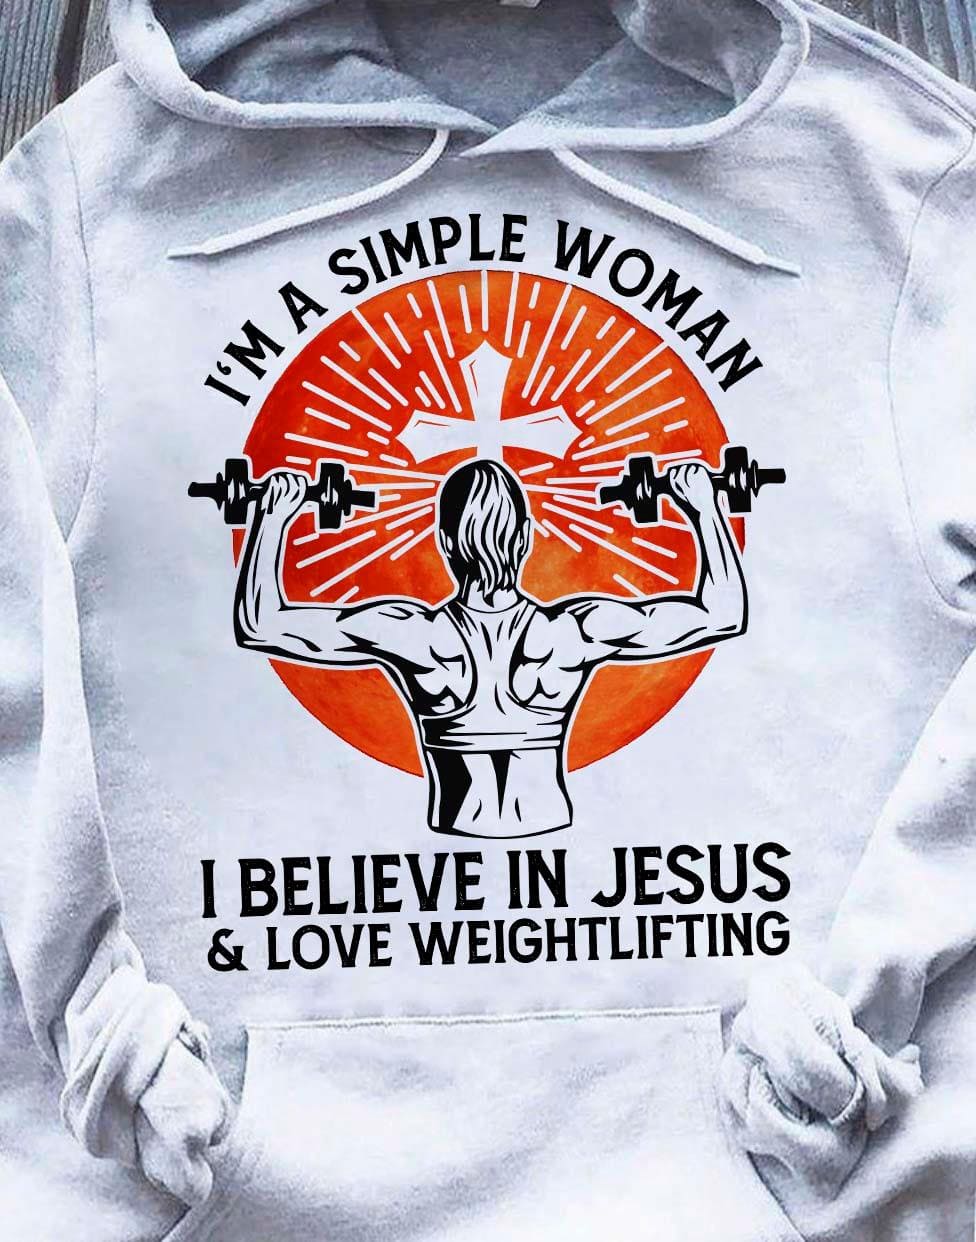 I'm a simple woman I believe in jesus and love weightlifting - Strong woman T-shirt